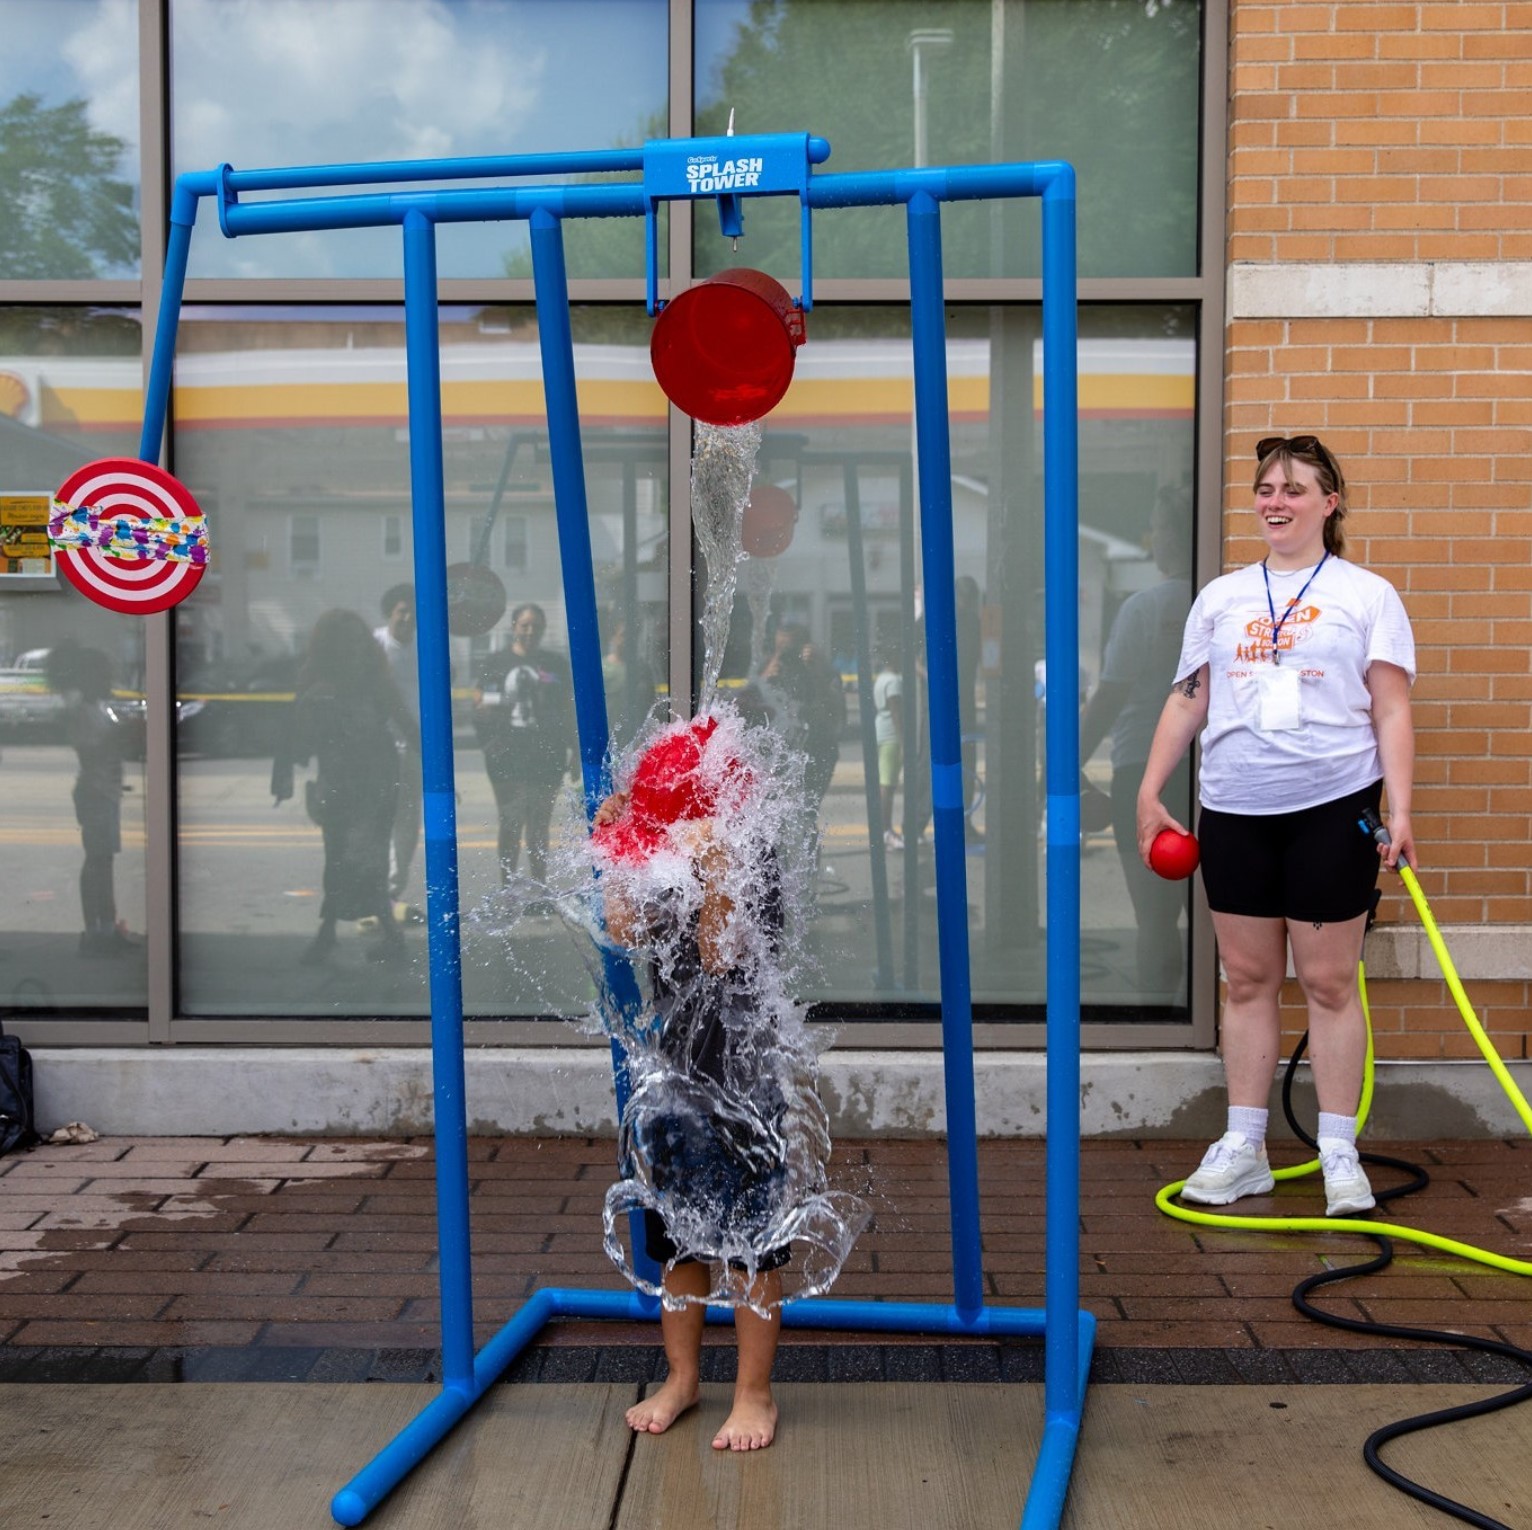 An Open Streets Volunteer stands smiling behind a child under the Splash Tower getting a bucket of water dumped on their head.